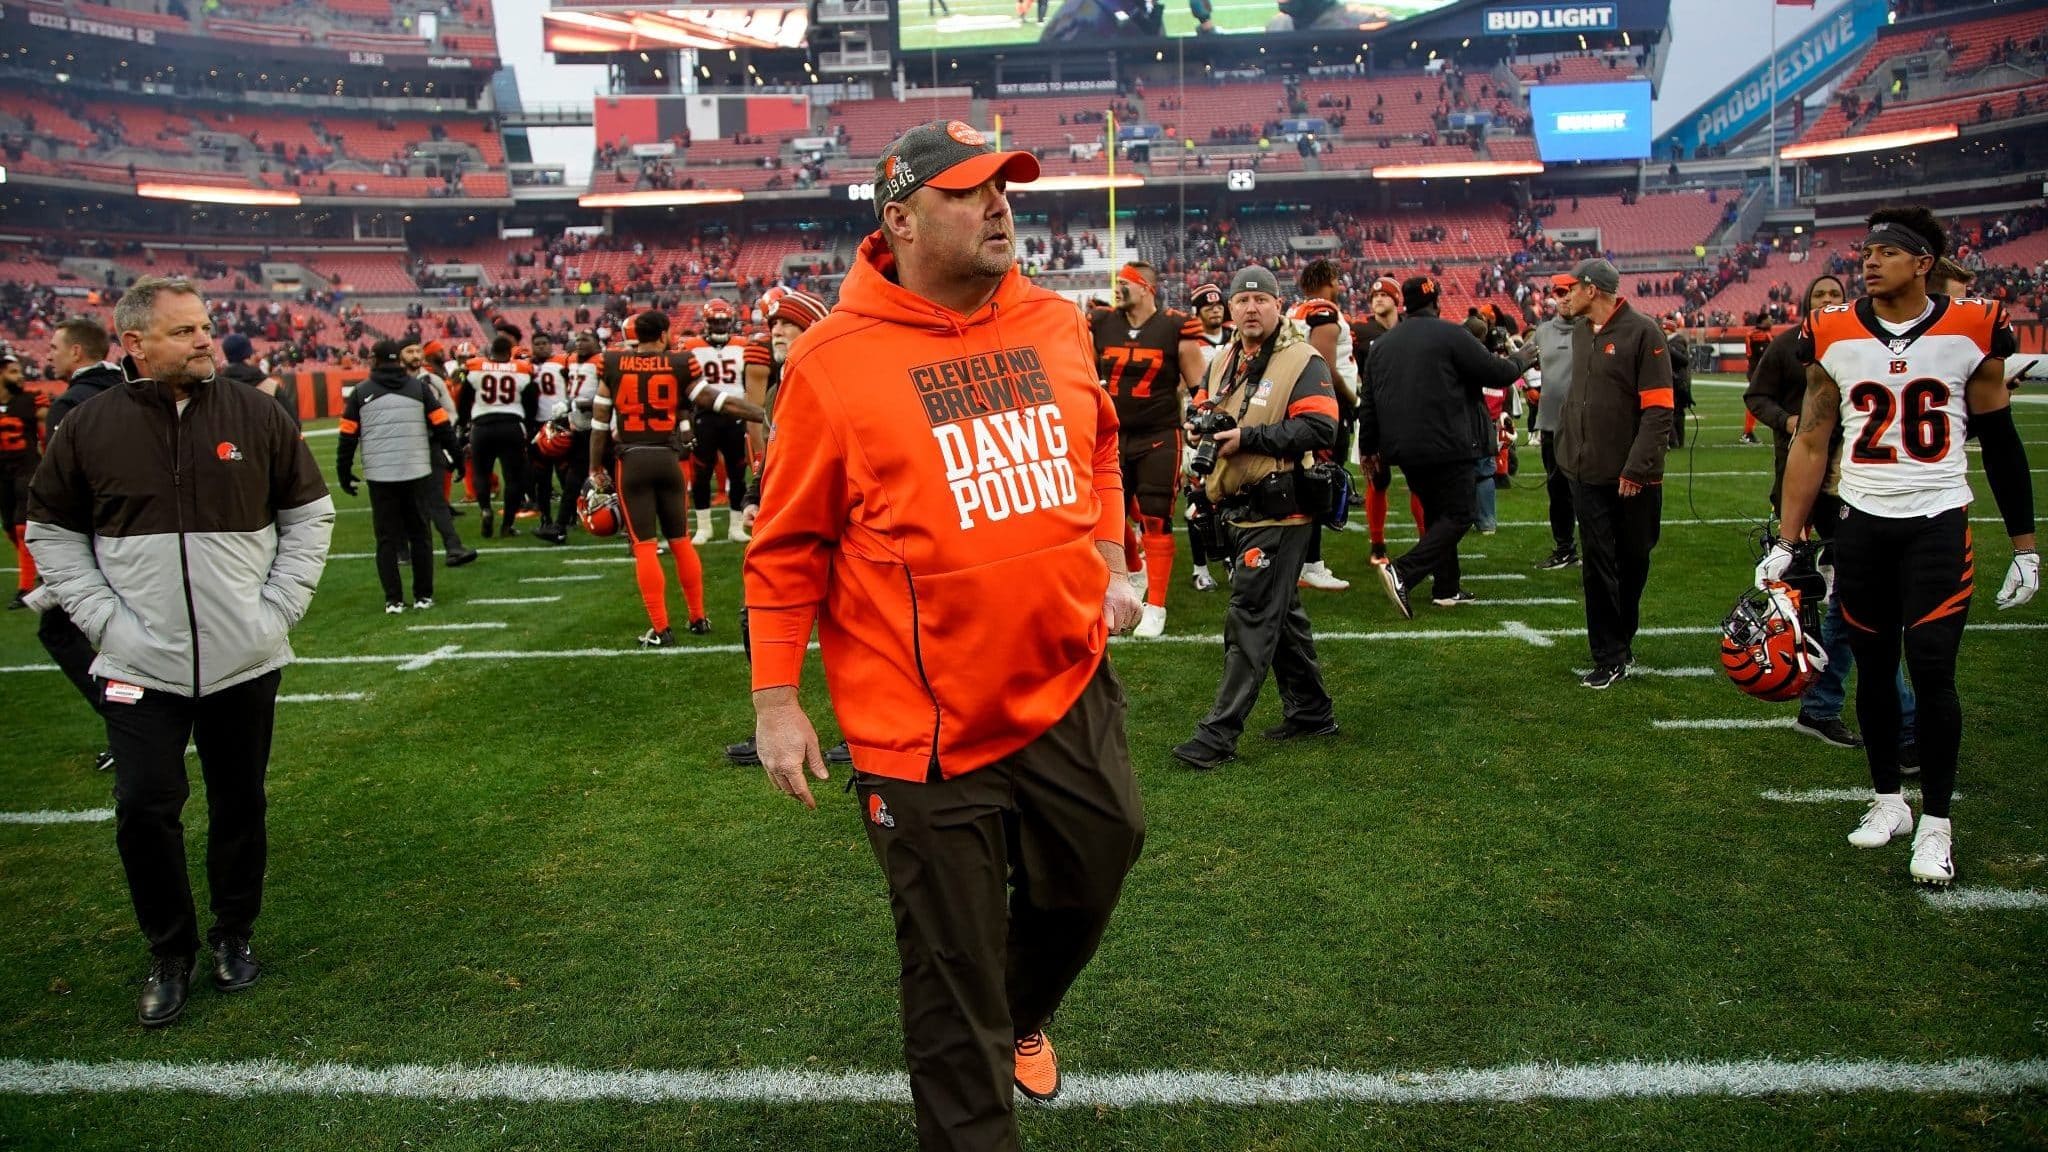 CLEVELAND, OH - DECEMBER 8: Head coach Freddie Kitchens of the Cleveland Browns walks off of the field after the game against the Cincinnati Bengals at FirstEnergy Stadium on December 8, 2019 in Cleveland, Ohio. Cleveland defeated Cincinnati 27-19.